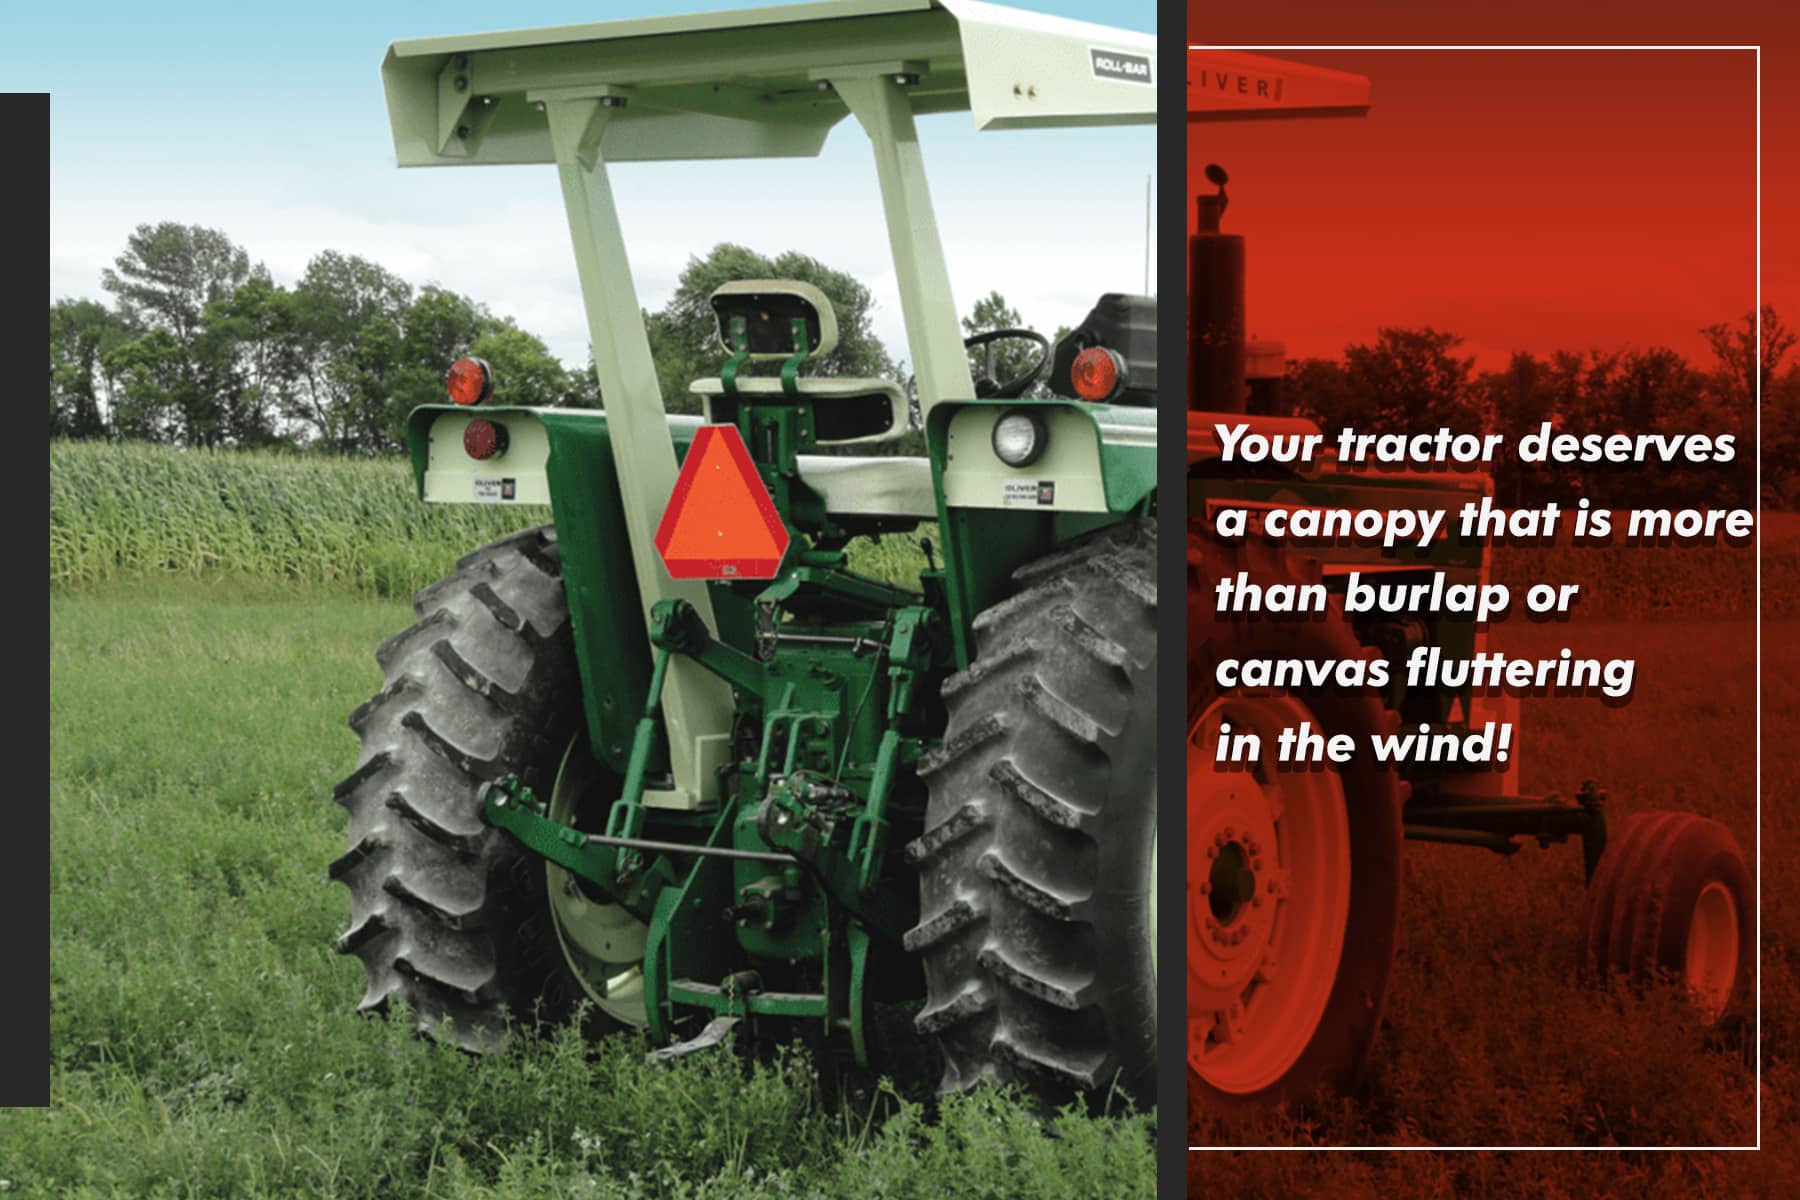 your tractor deserves a good shade canopy